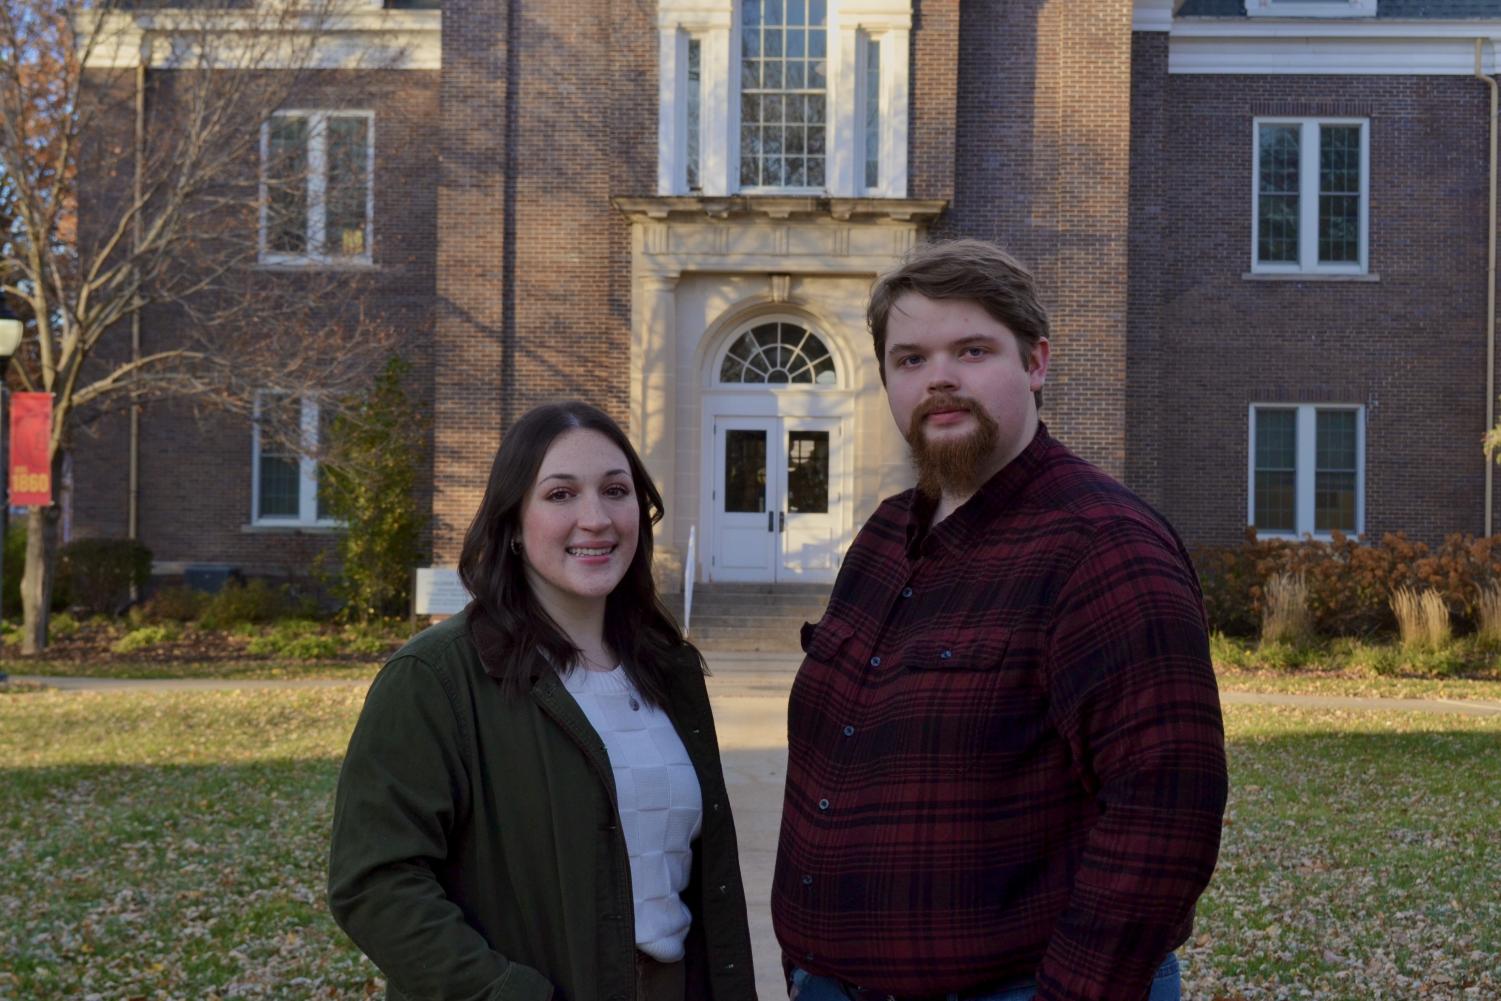 Scout Peery and Scott Krueger have become the newly elected Student Body President and Vice President